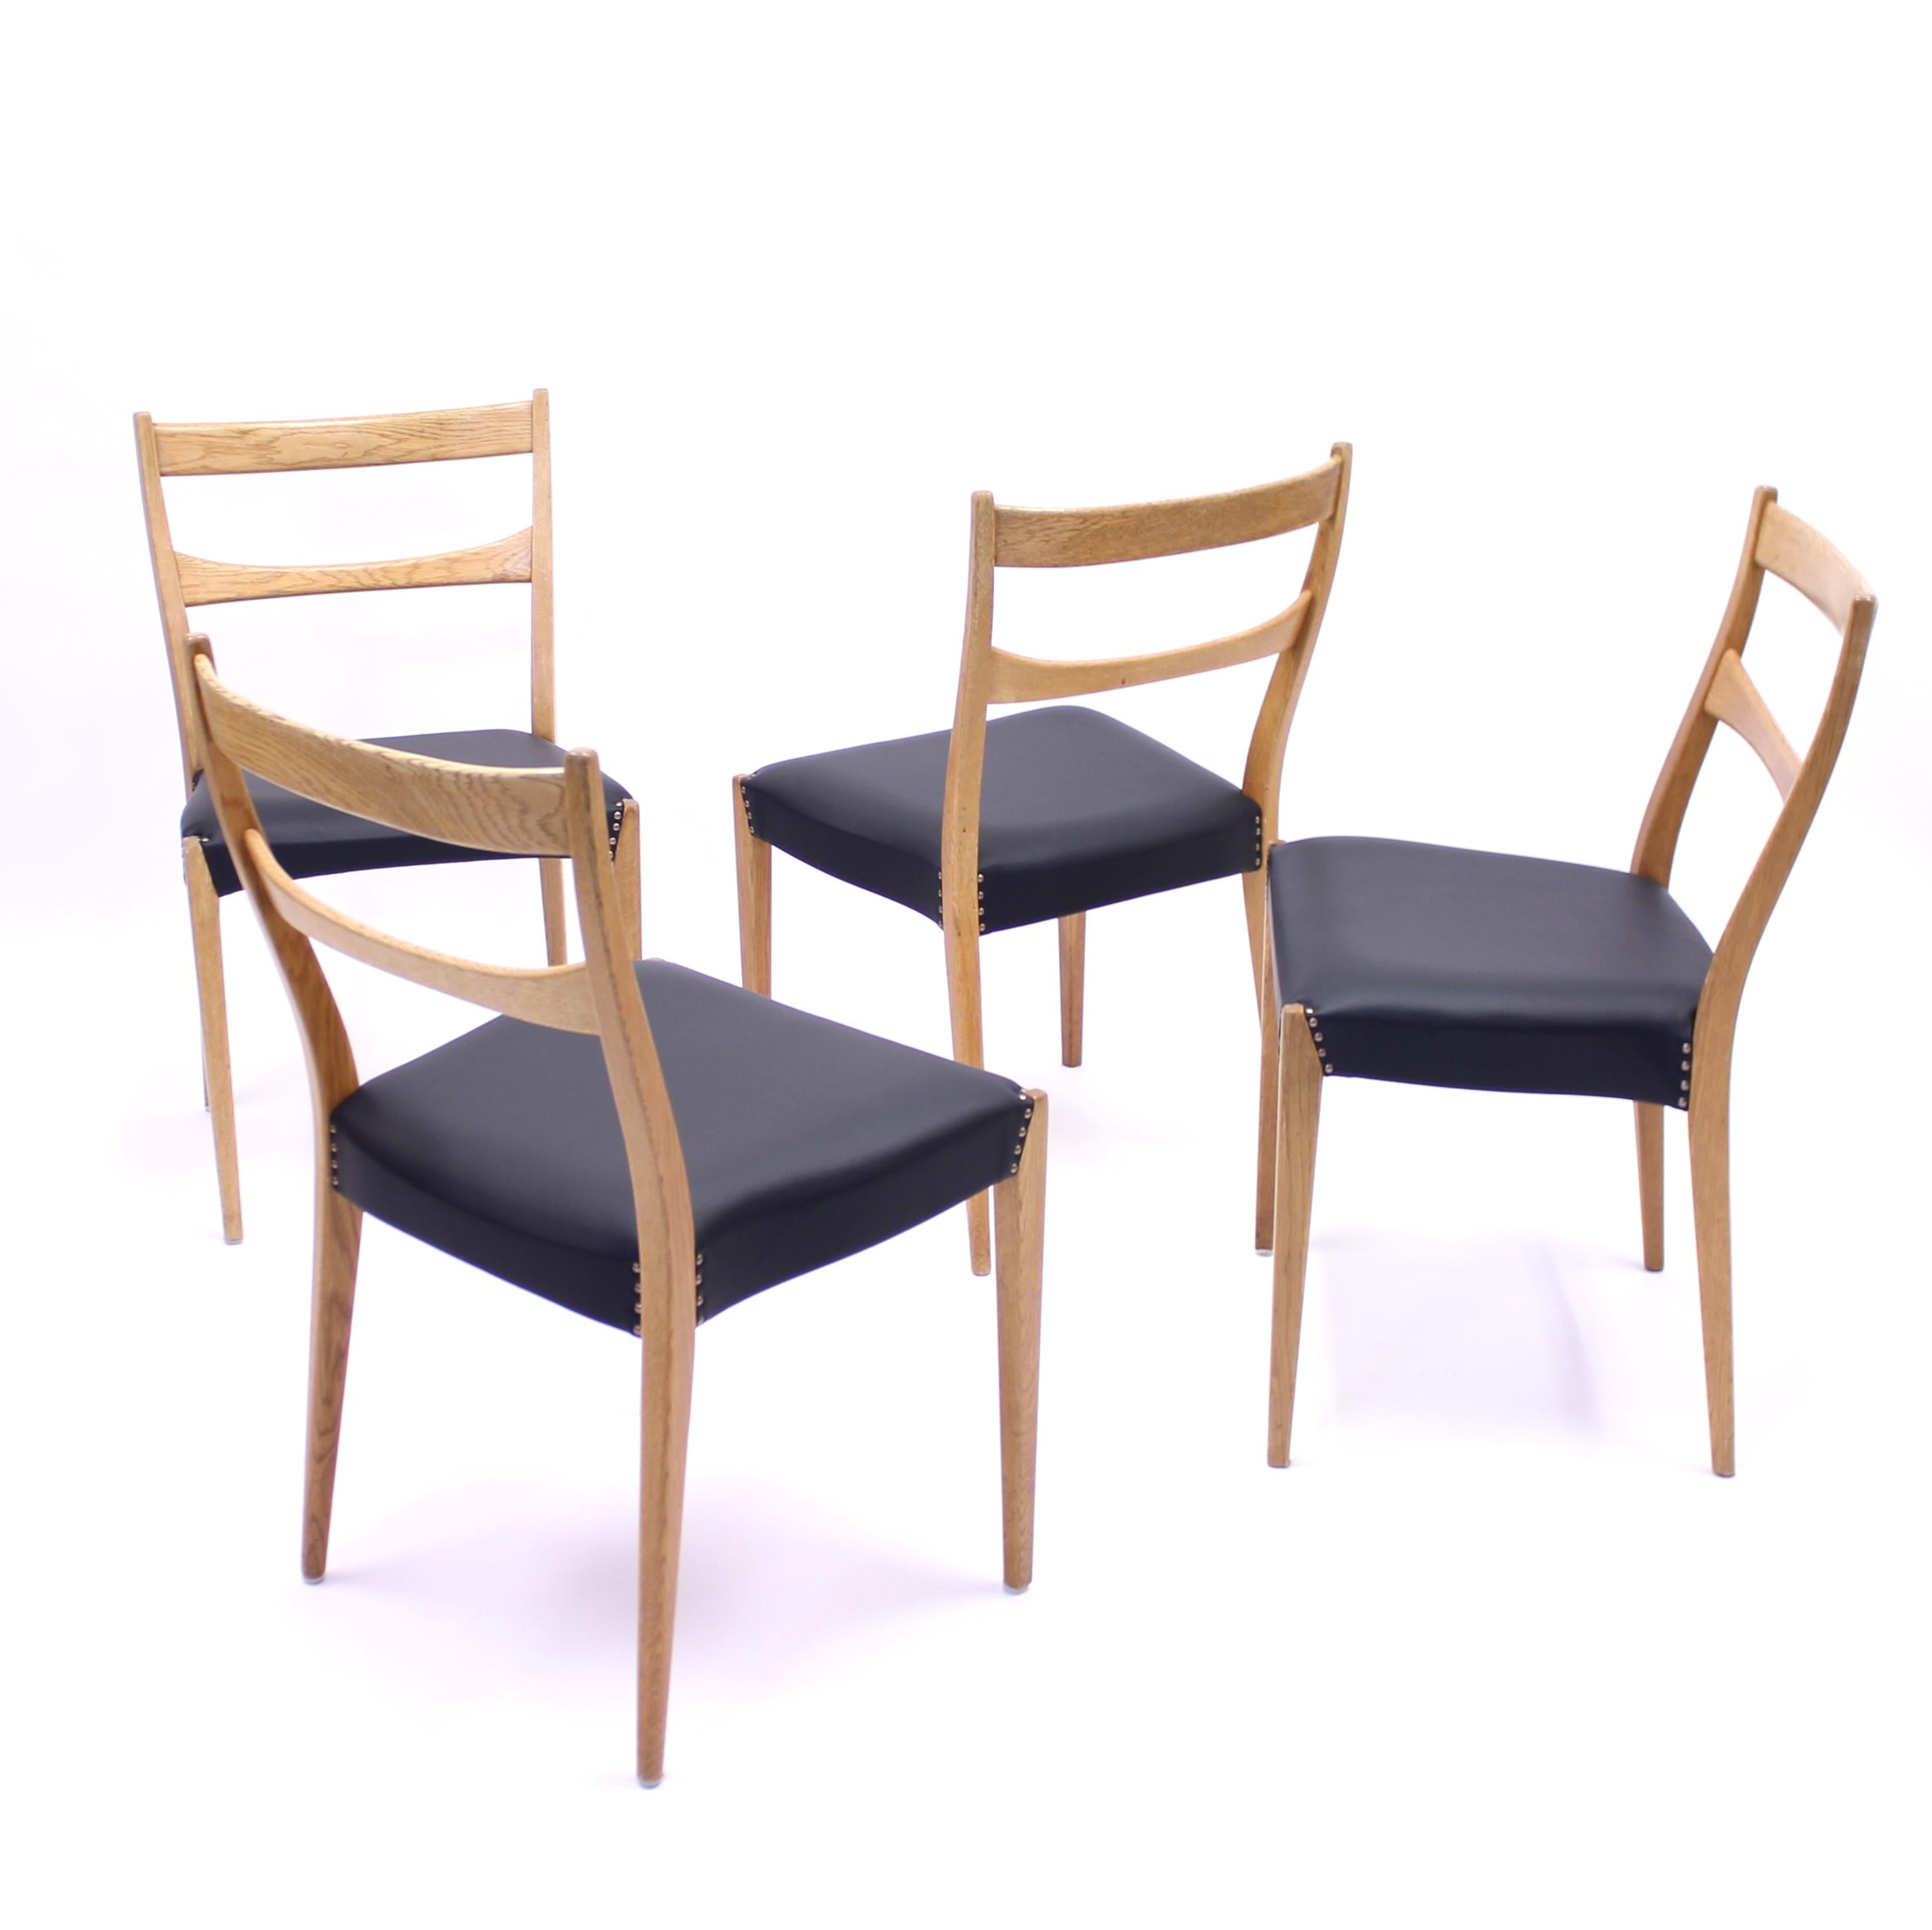 Scandinavian Oak Dining Chairs with Black Leather Seats, 1950s For Sale 1